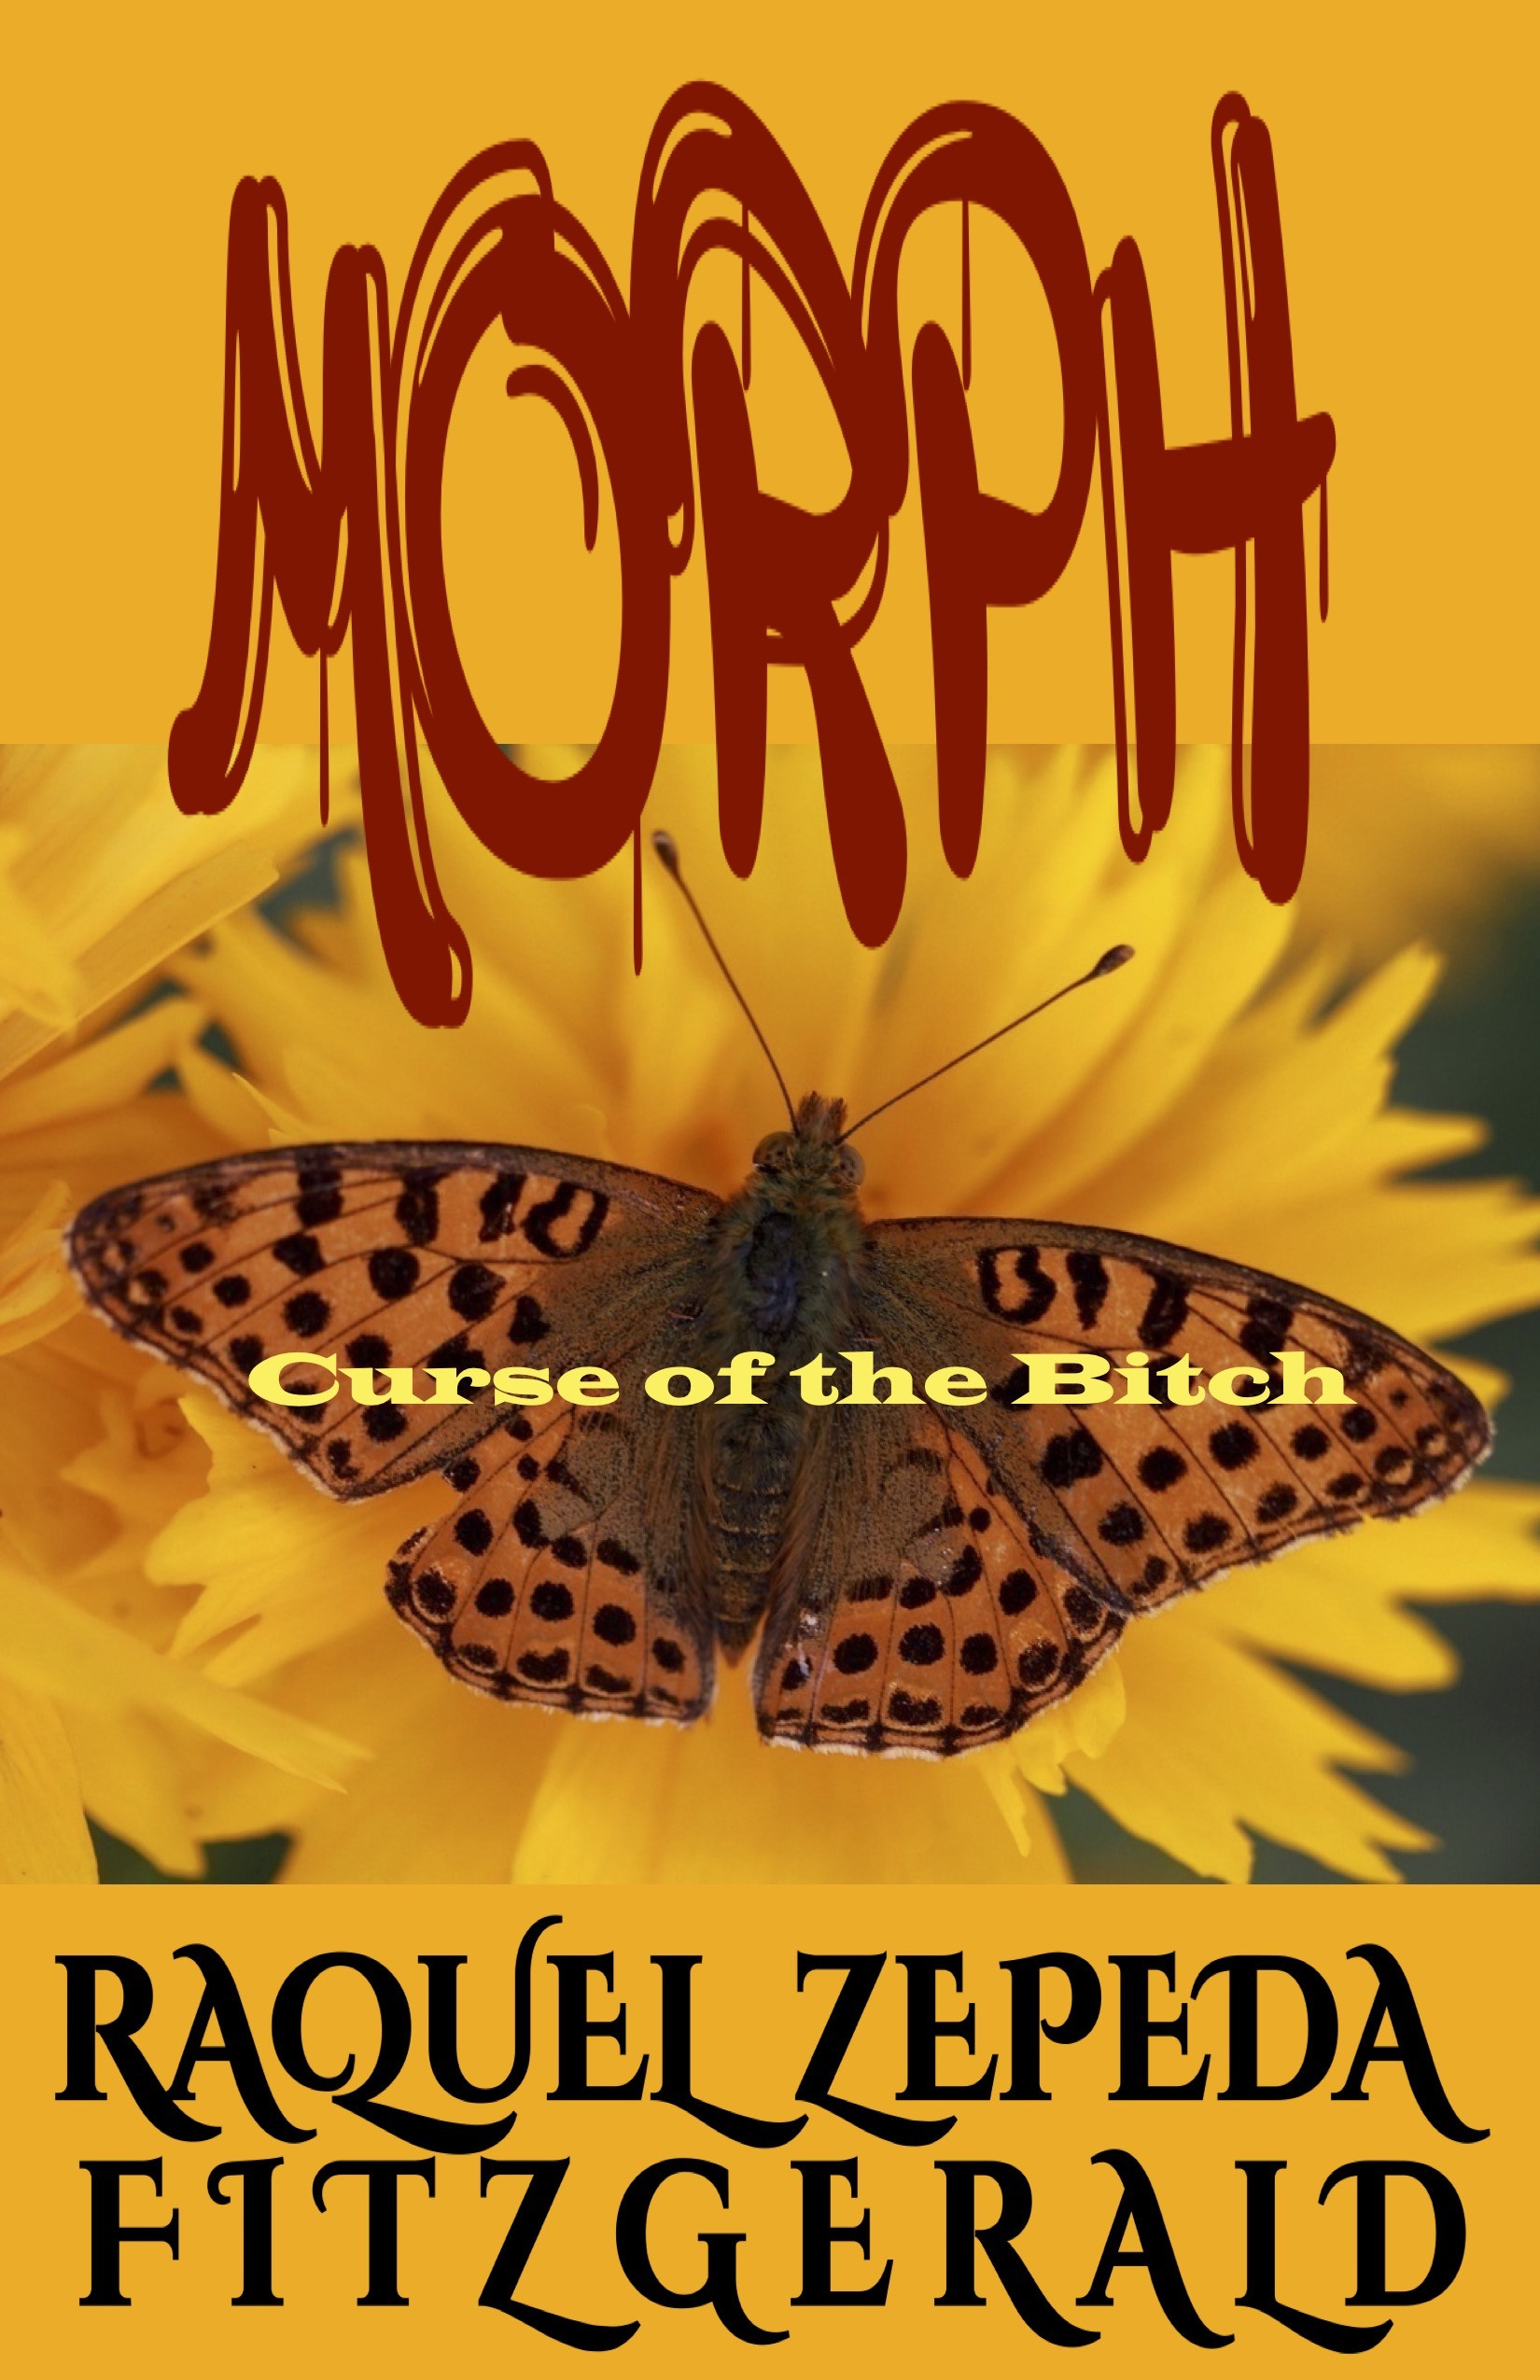 Morph - Curse of the Bitch